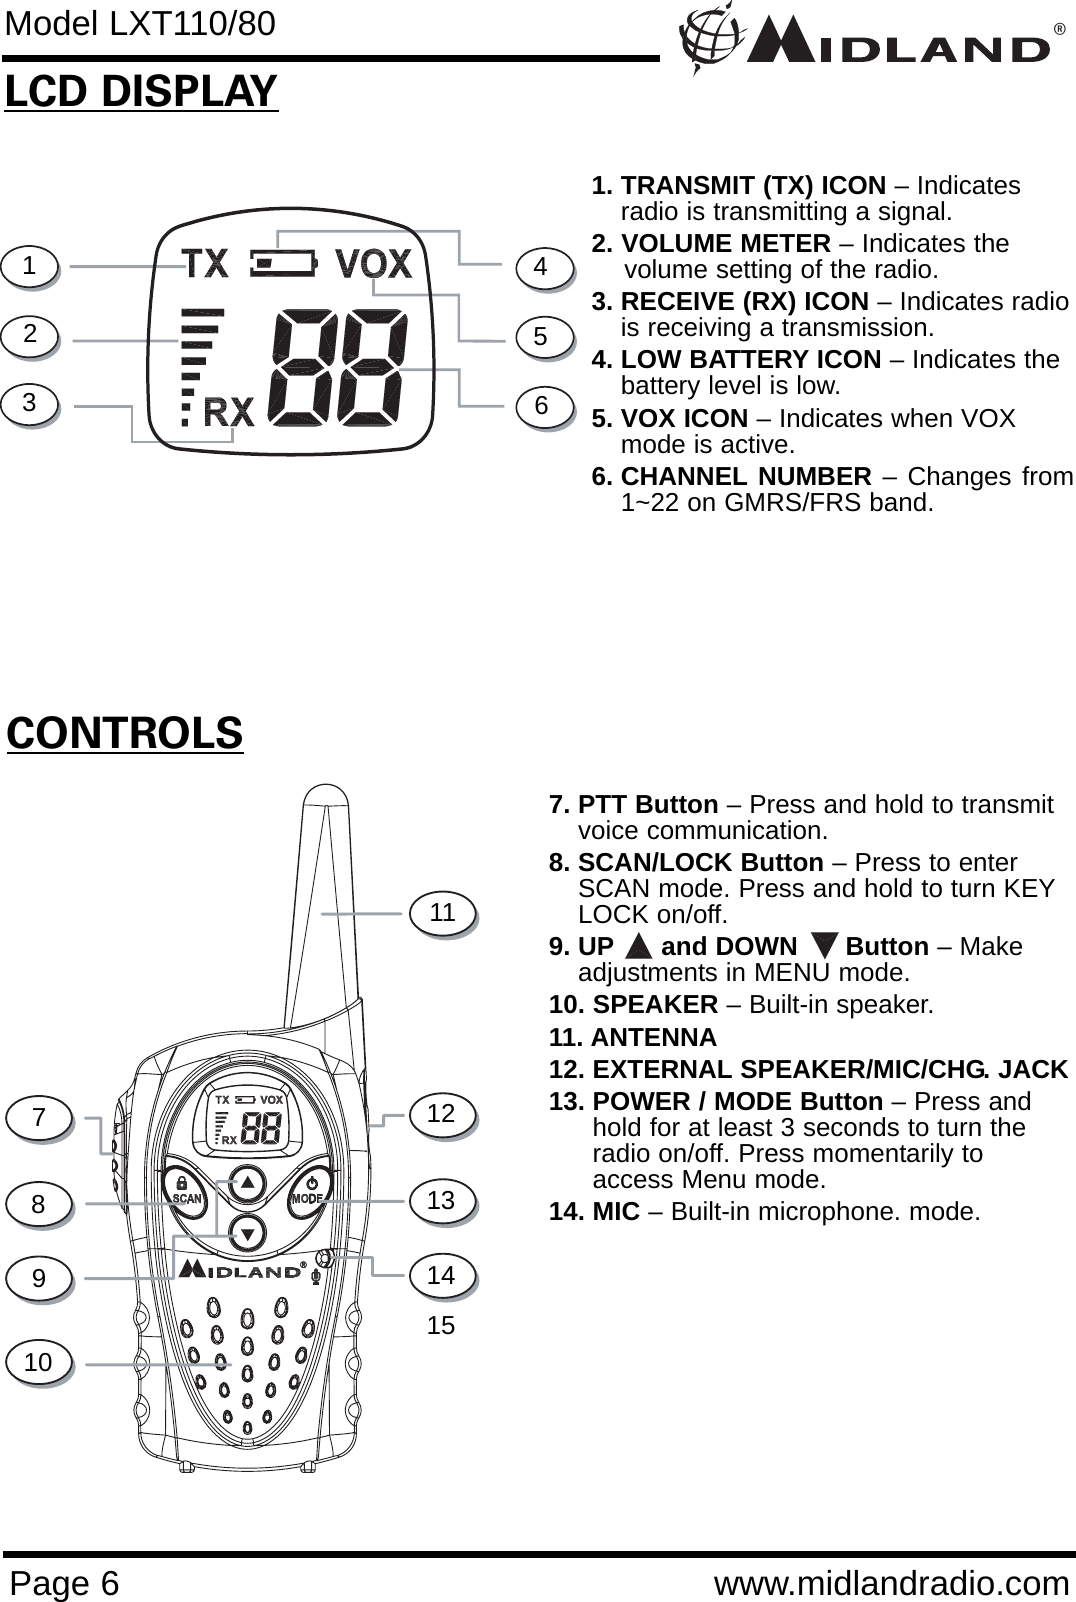 ®Page 6 www.midlandradio.comCONTROLSLCD DISPLAY1. TRANSMIT (TX) ICON – Indicatesradio is transmitting a signal.2. VOLUME METER – Indicates the   volume setting of the radio.3. RECEIVE (RX) ICON – Indicates radiois receiving a transmission.4. LOW BATTERY ICON – Indicates thebattery level is low.5. VOX ICON – Indicates when VOXmode is active. 6. CHANNEL NUMBER – Changes from1~22 on GMRS/FRS band.7. PTT Button – Press and hold to transmitvoice communication. 8. SCAN/LOCK Button – Press to enterSCAN mode. Press and hold to turn KEYLOCK on/off.9. UP and DOWN      Button – Makeadjustments in MENU mode.10. SPEAKER – Built-in speaker.11. ANTENNA12. EXTERNAL SPEAKER/MIC/CHG. JACK  13. POWER / MODE Button – Press andhold for at least 3 seconds to turn theradio on/off. Press momentarily toaccess Menu mode. 14. MIC – Built-in microphone. mode. 1234567891015141311Model LXT110/8012